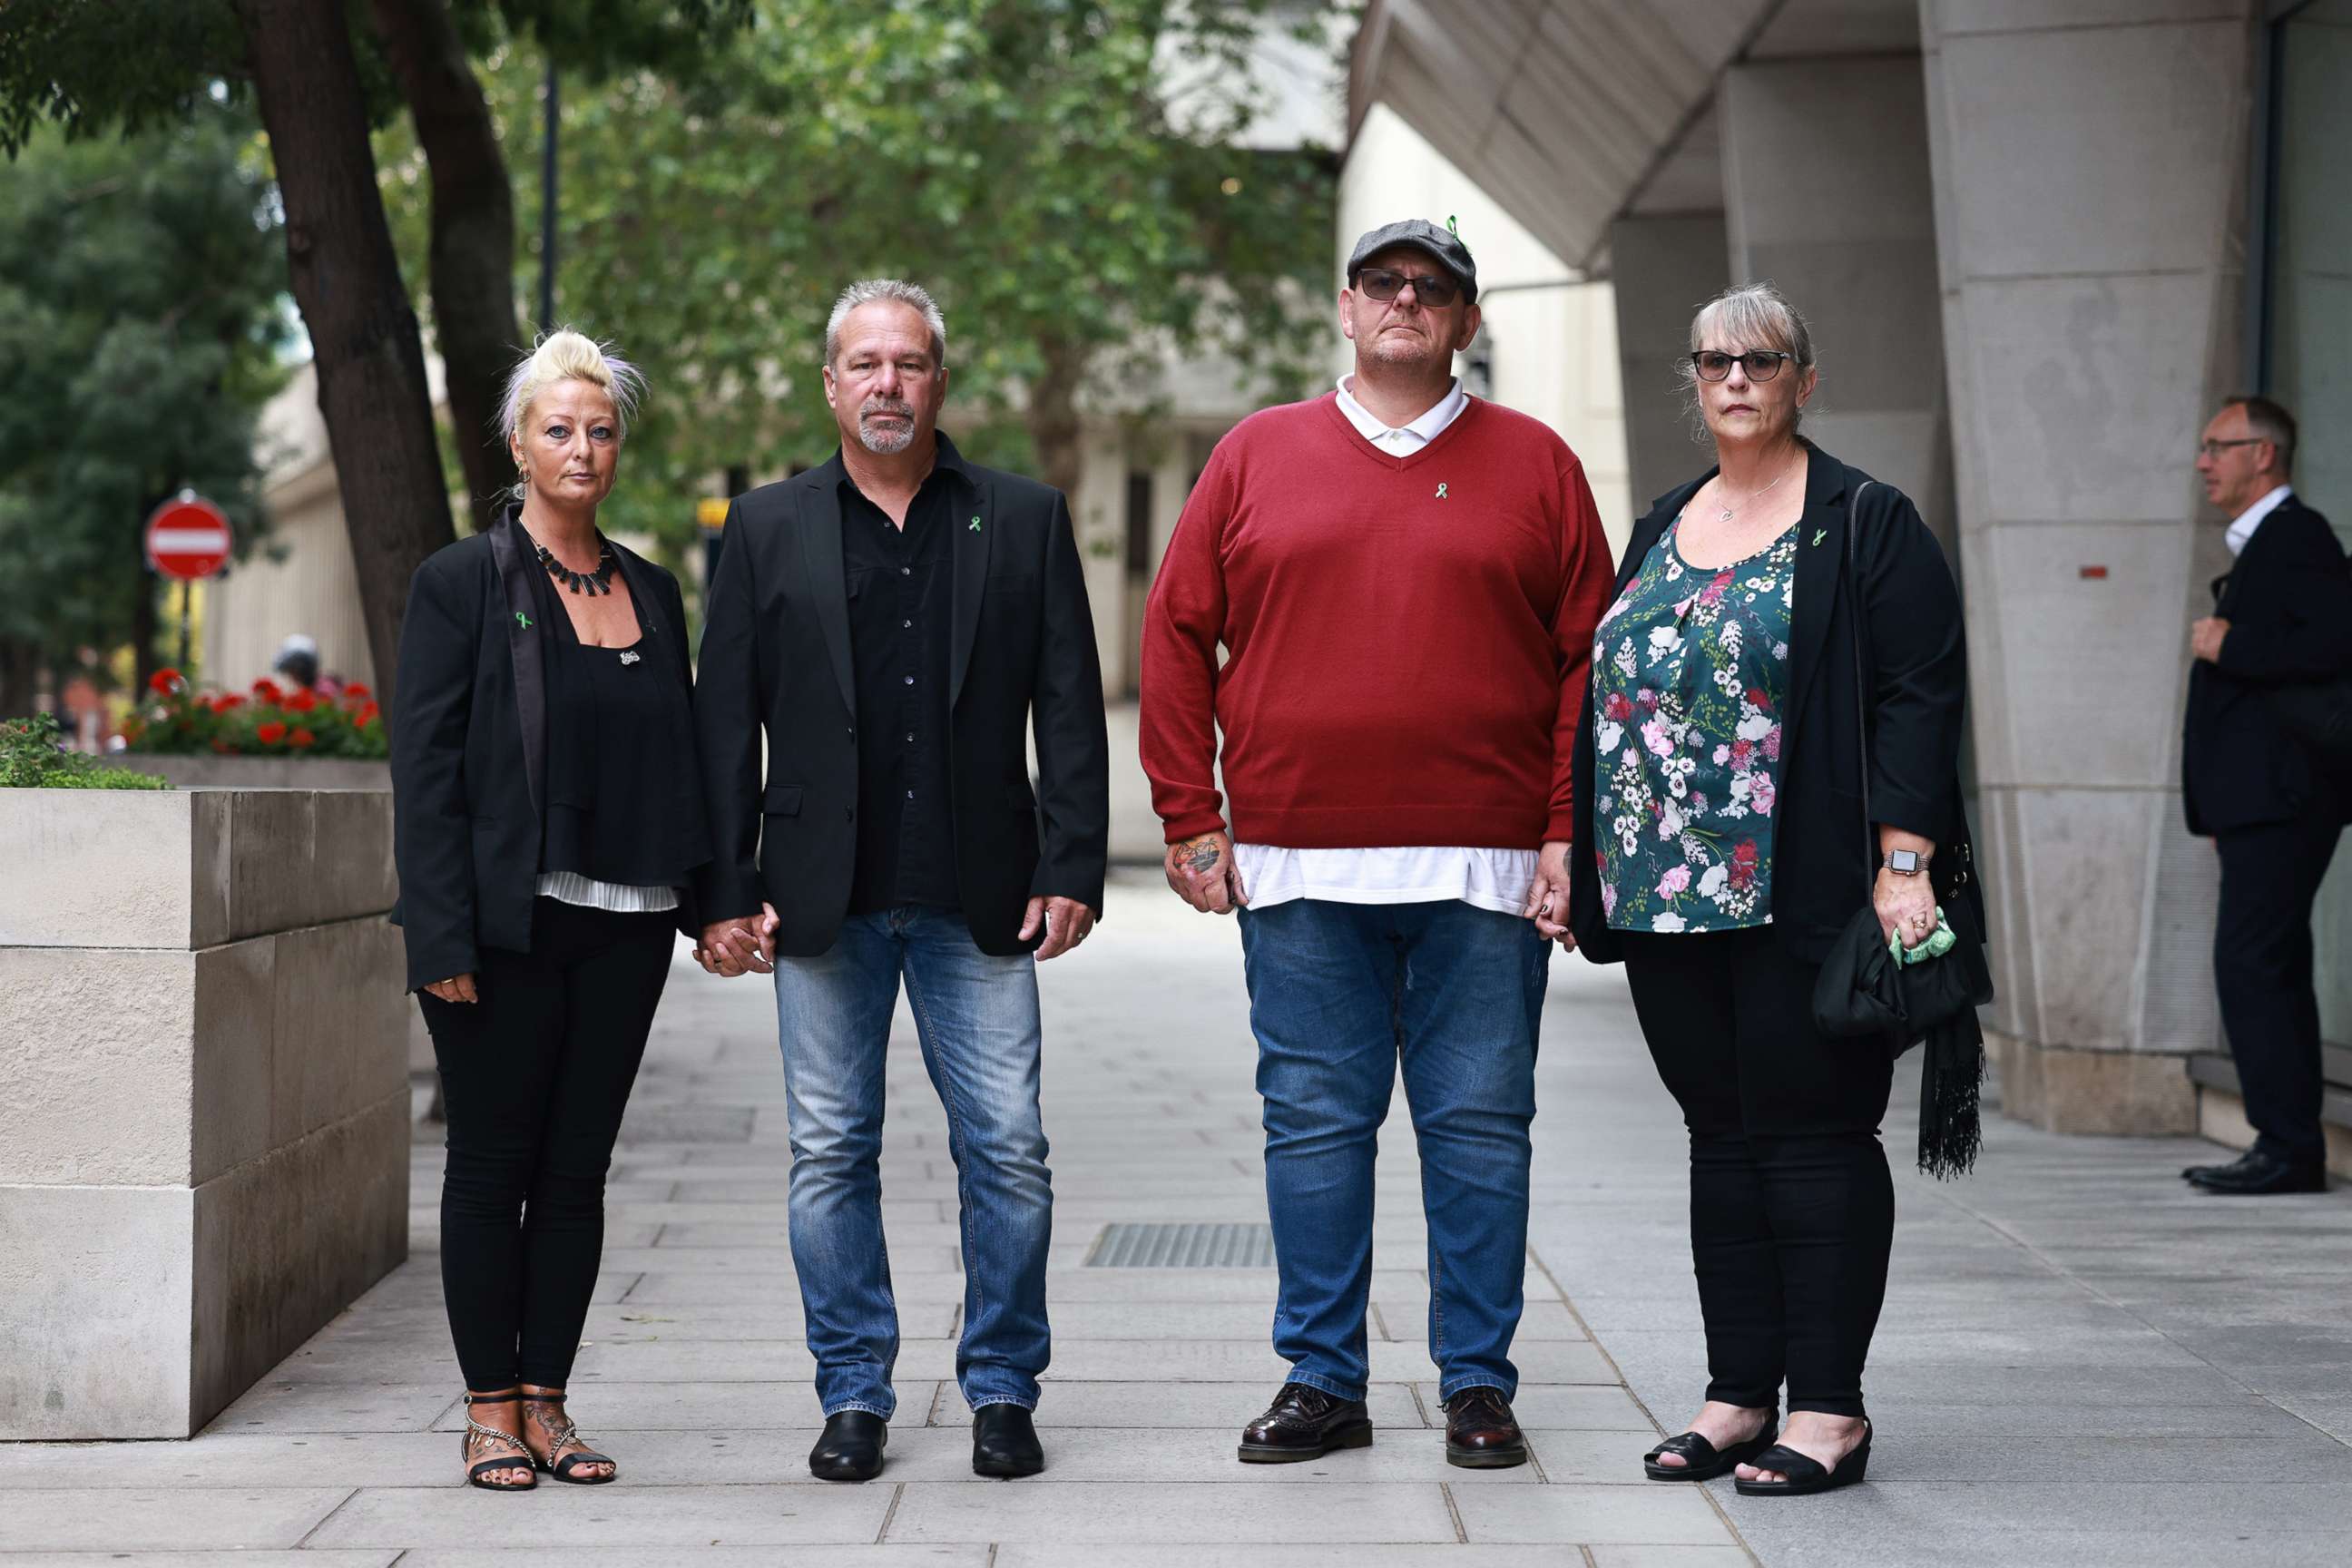 PHOTO: The parents and step-parents of Harry Dunn are shown ahead of their meeting with Director of Public Prosecutions Max Hill, at CPS Headquarters in London, Sept. 9, 2020.